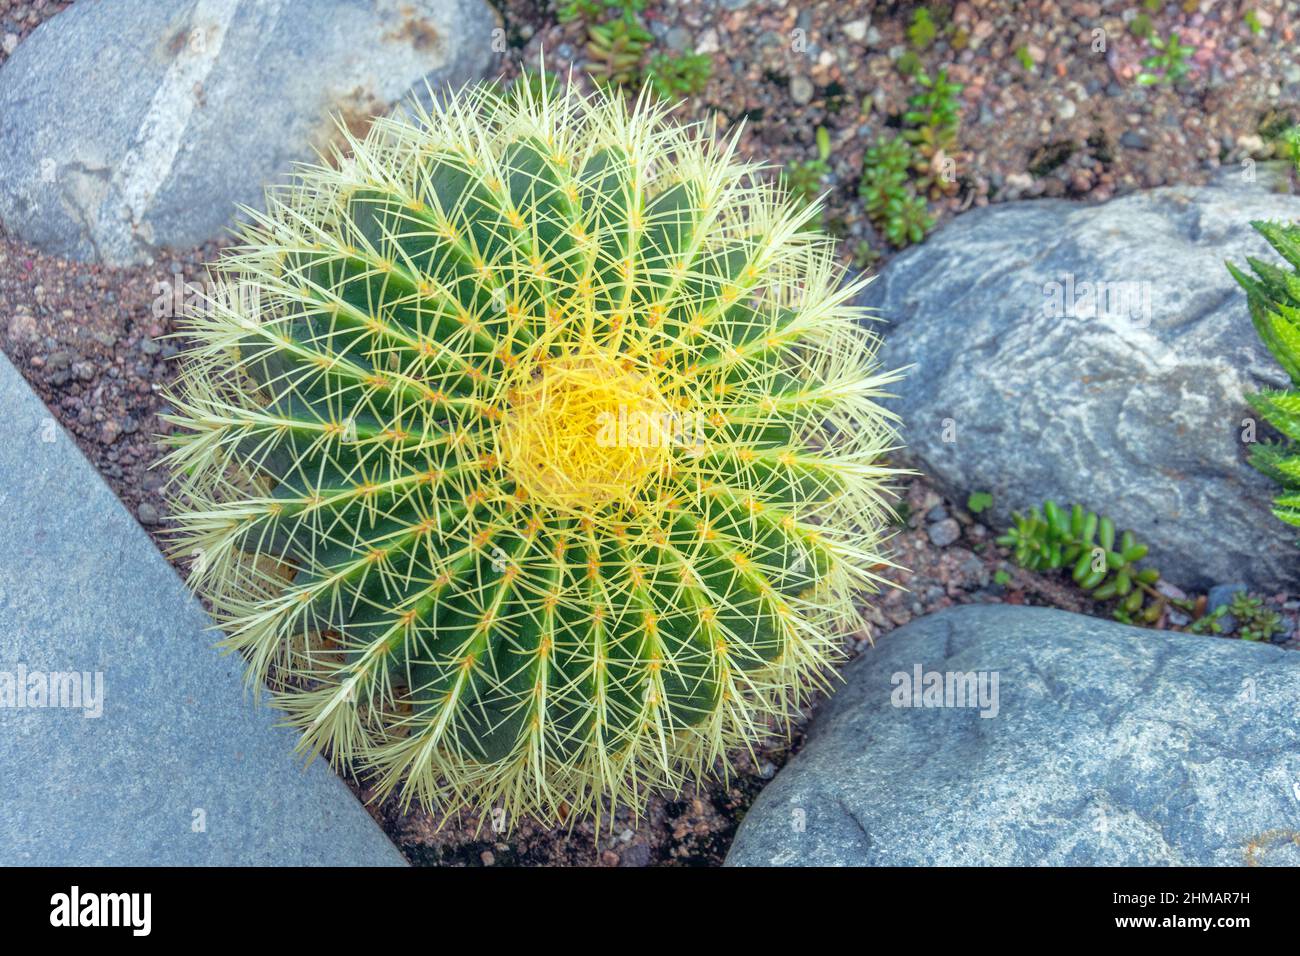 Large round cactus with yellow a needles Stock Photo